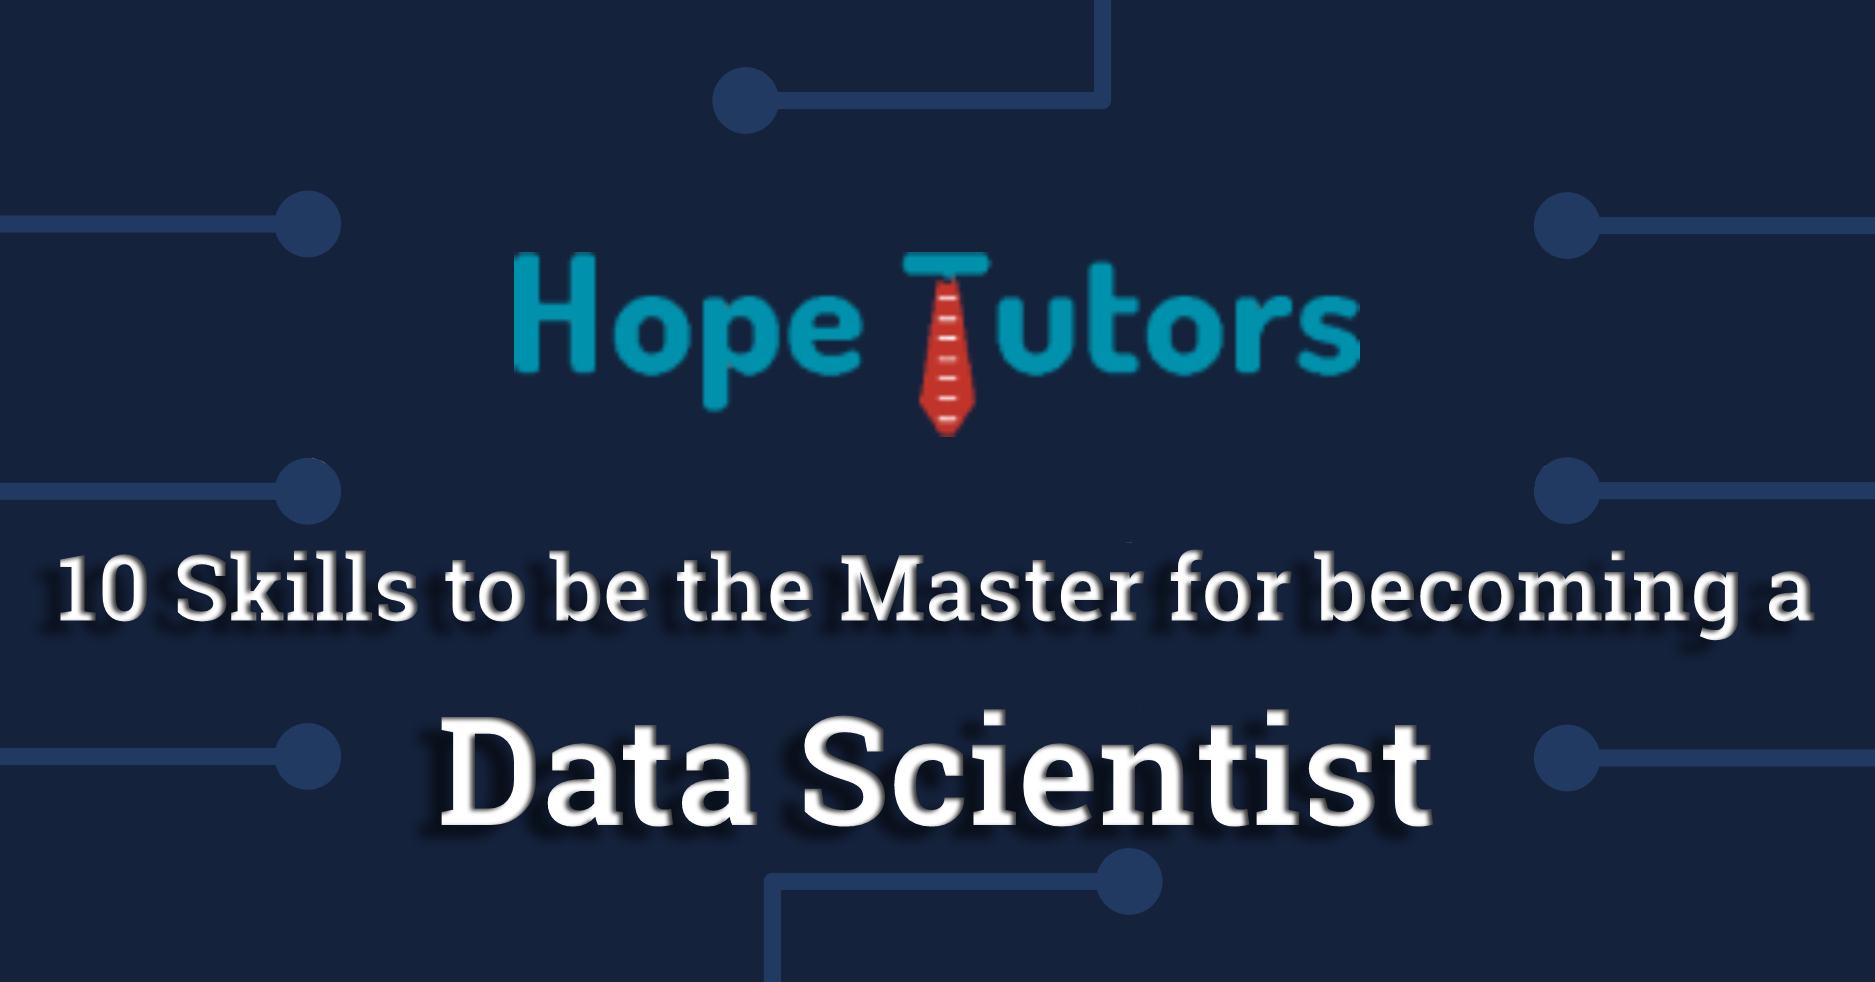 10 Skills to be the Master for becoming a Data Scientist (1)